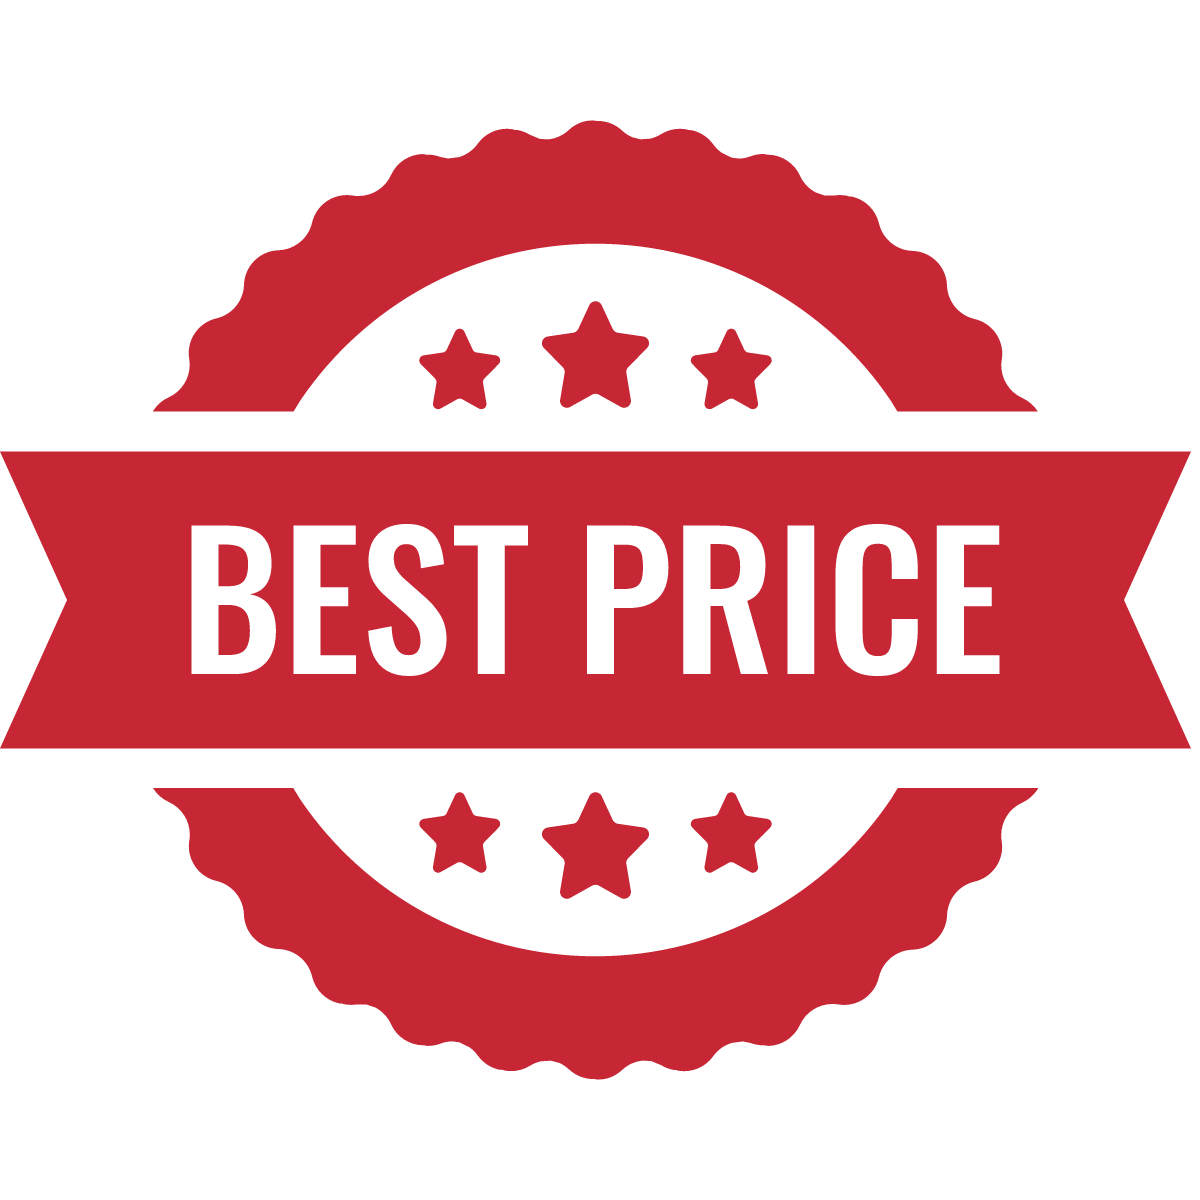 Red 'BEST PRICE' badge with five stars.